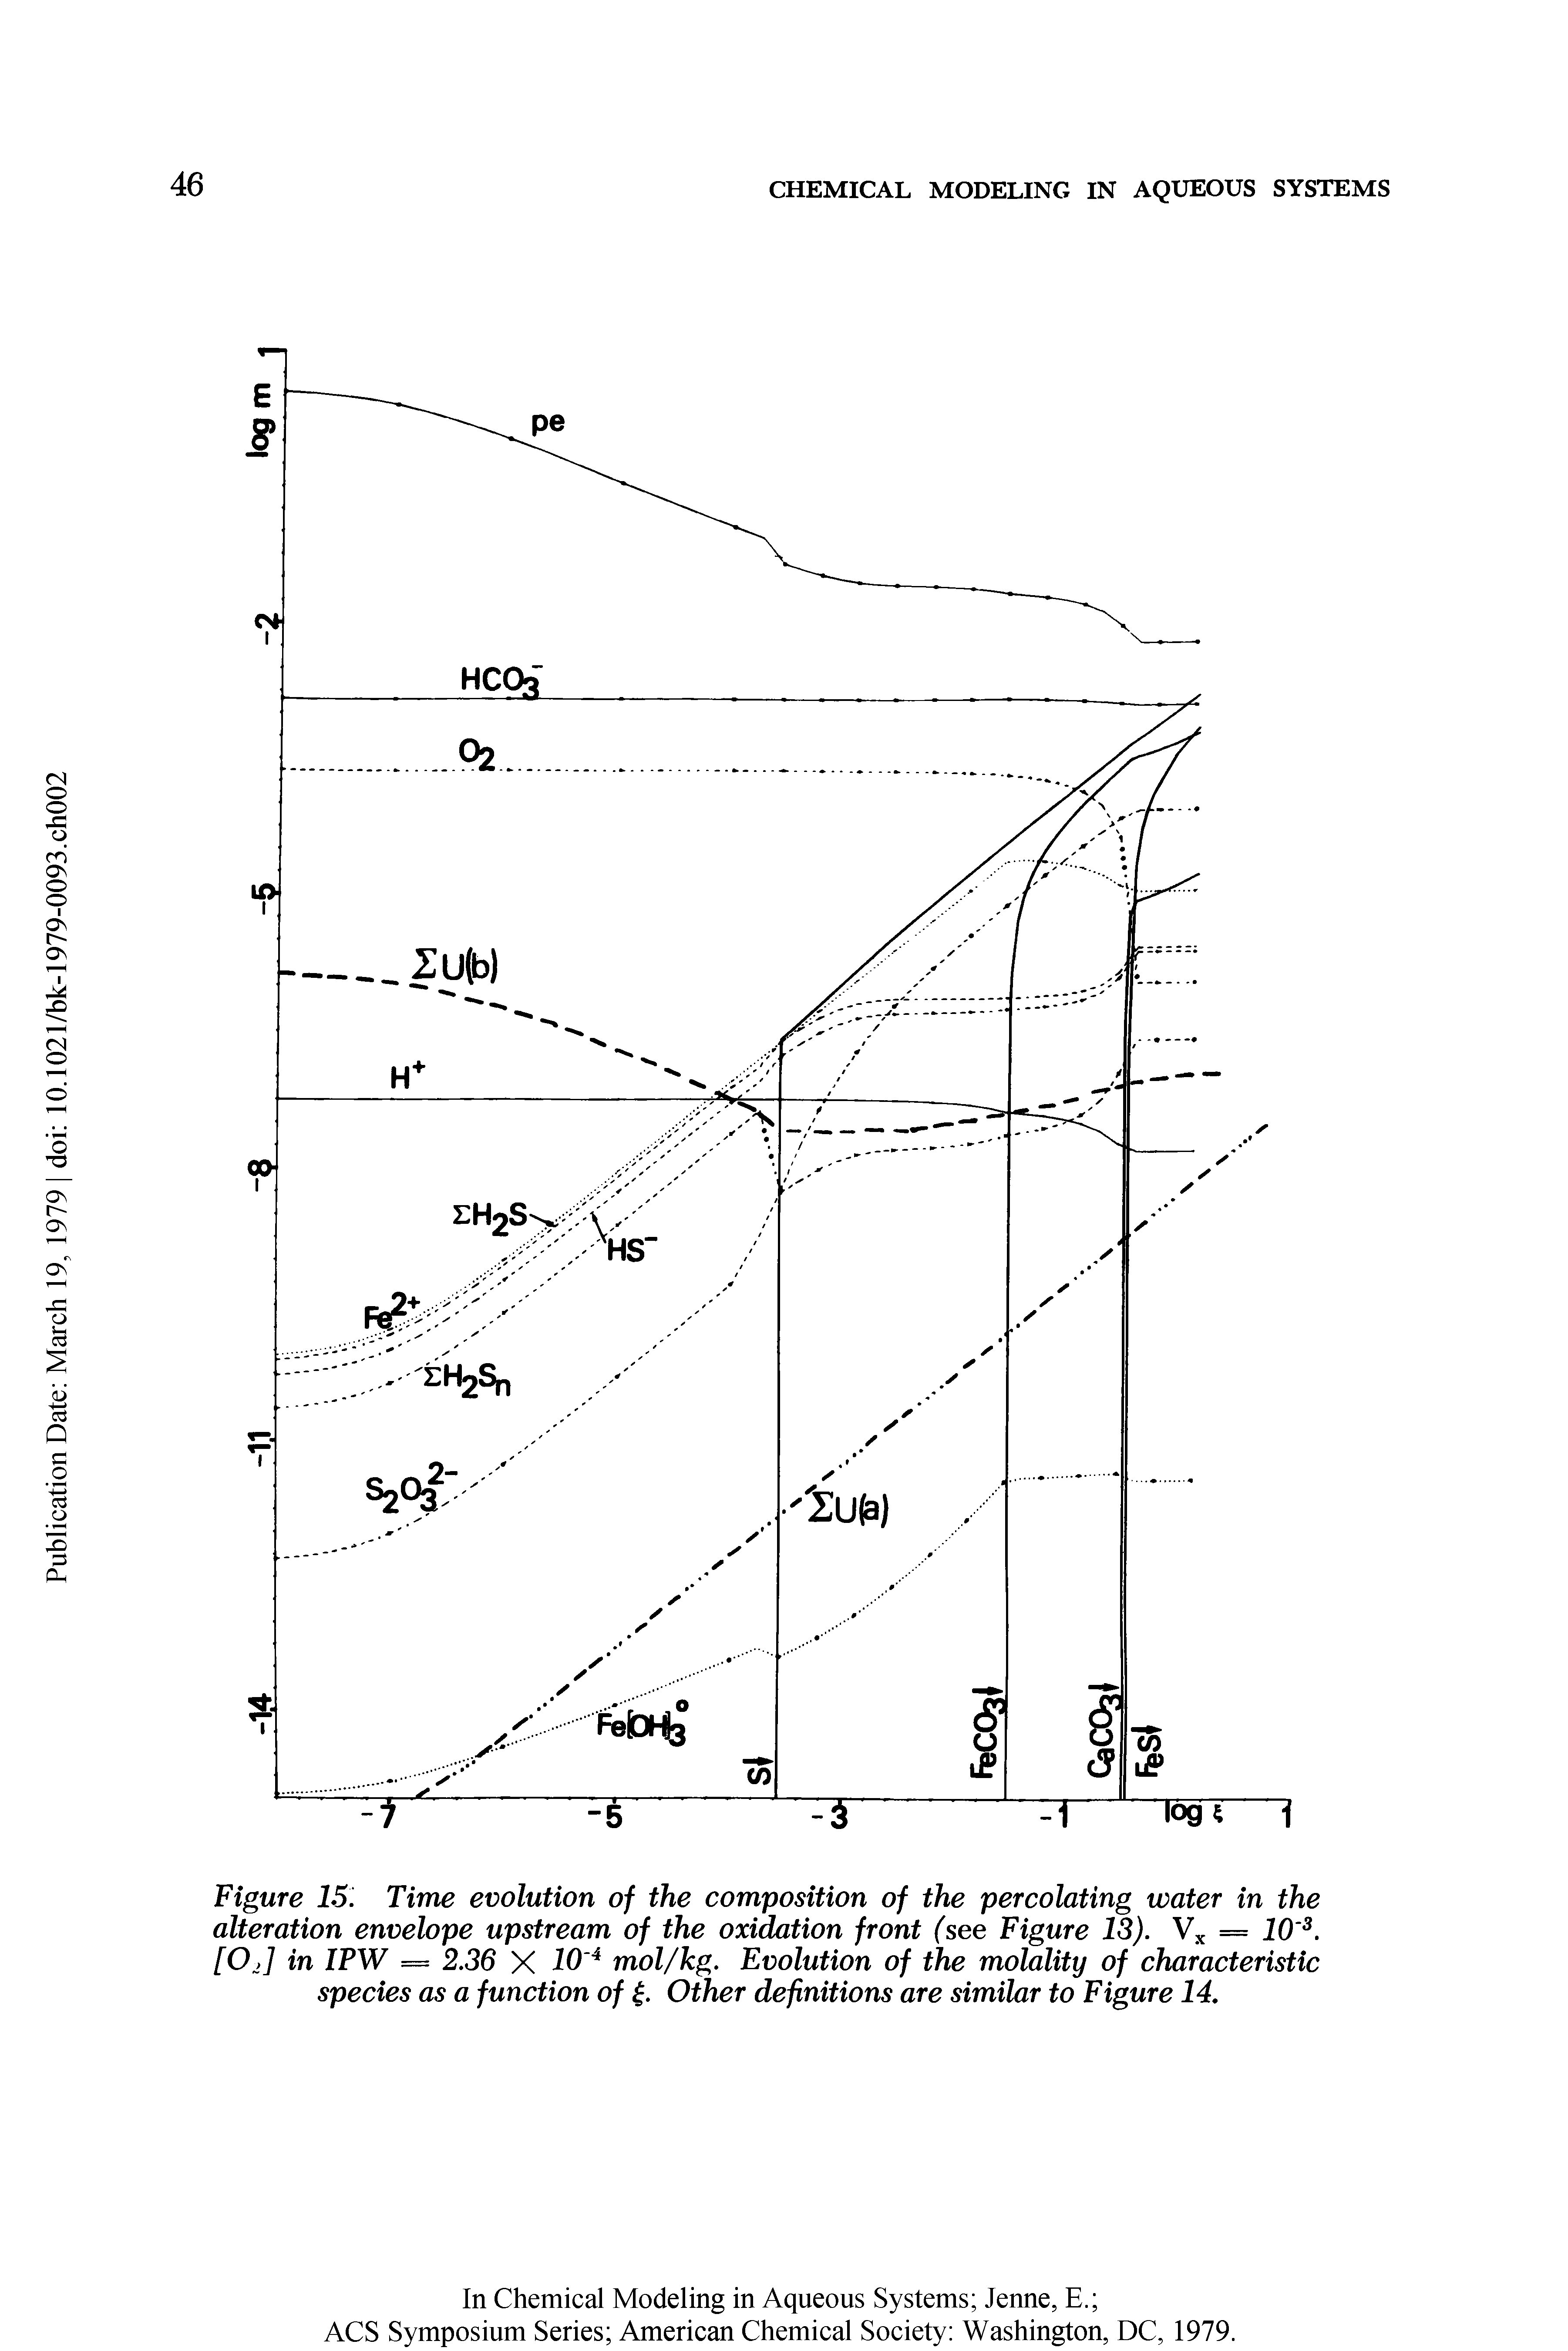 Figure IS. Time evolution of the composition of the percolating water in the alteration envelope upstream of the oxidation front (see Figure 13). = 10. ...